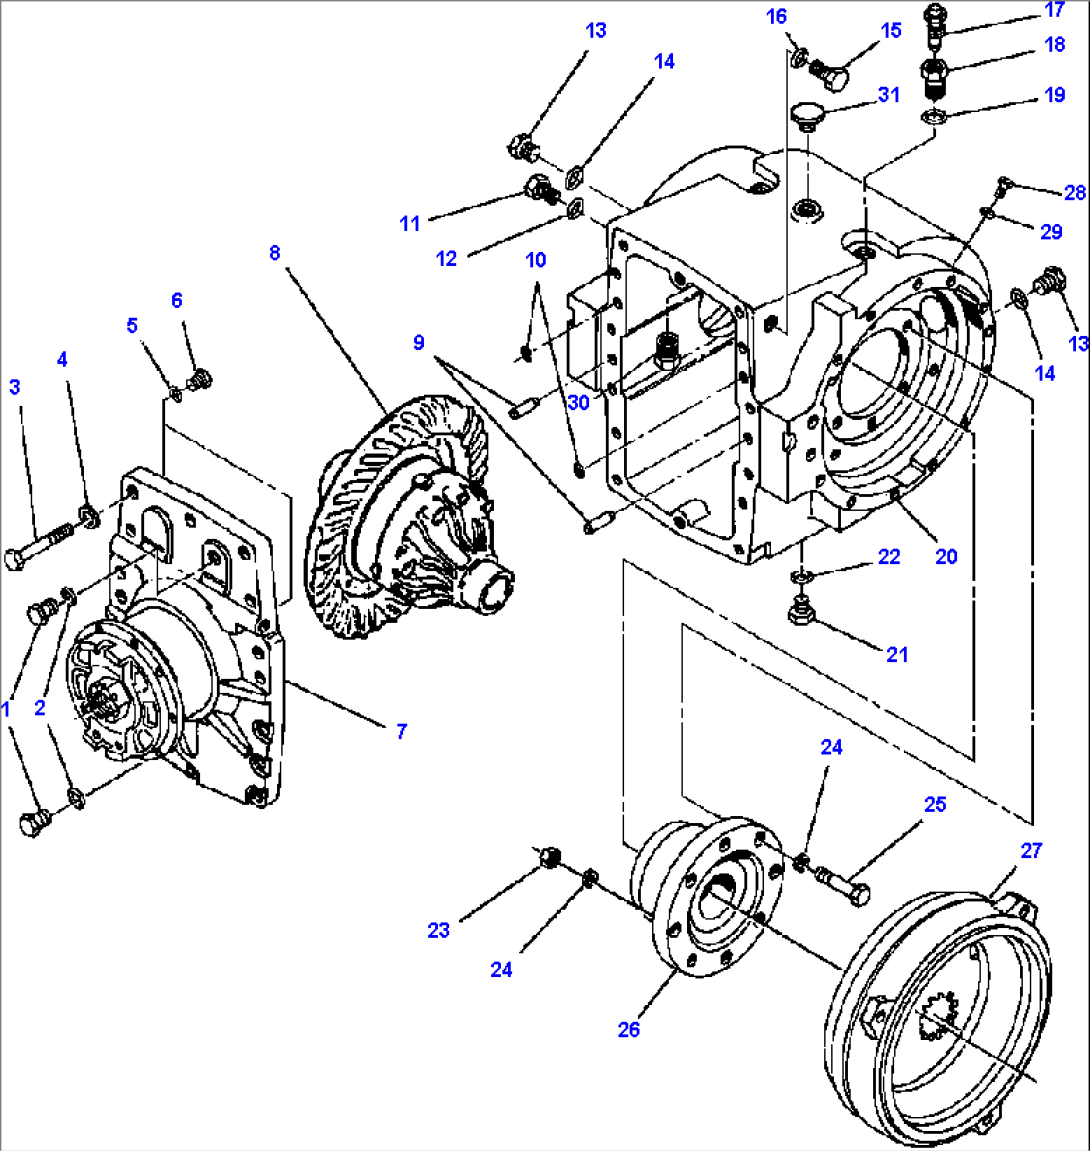 NoSPIN DIFFERENTIAL CASE ASSEMBLY